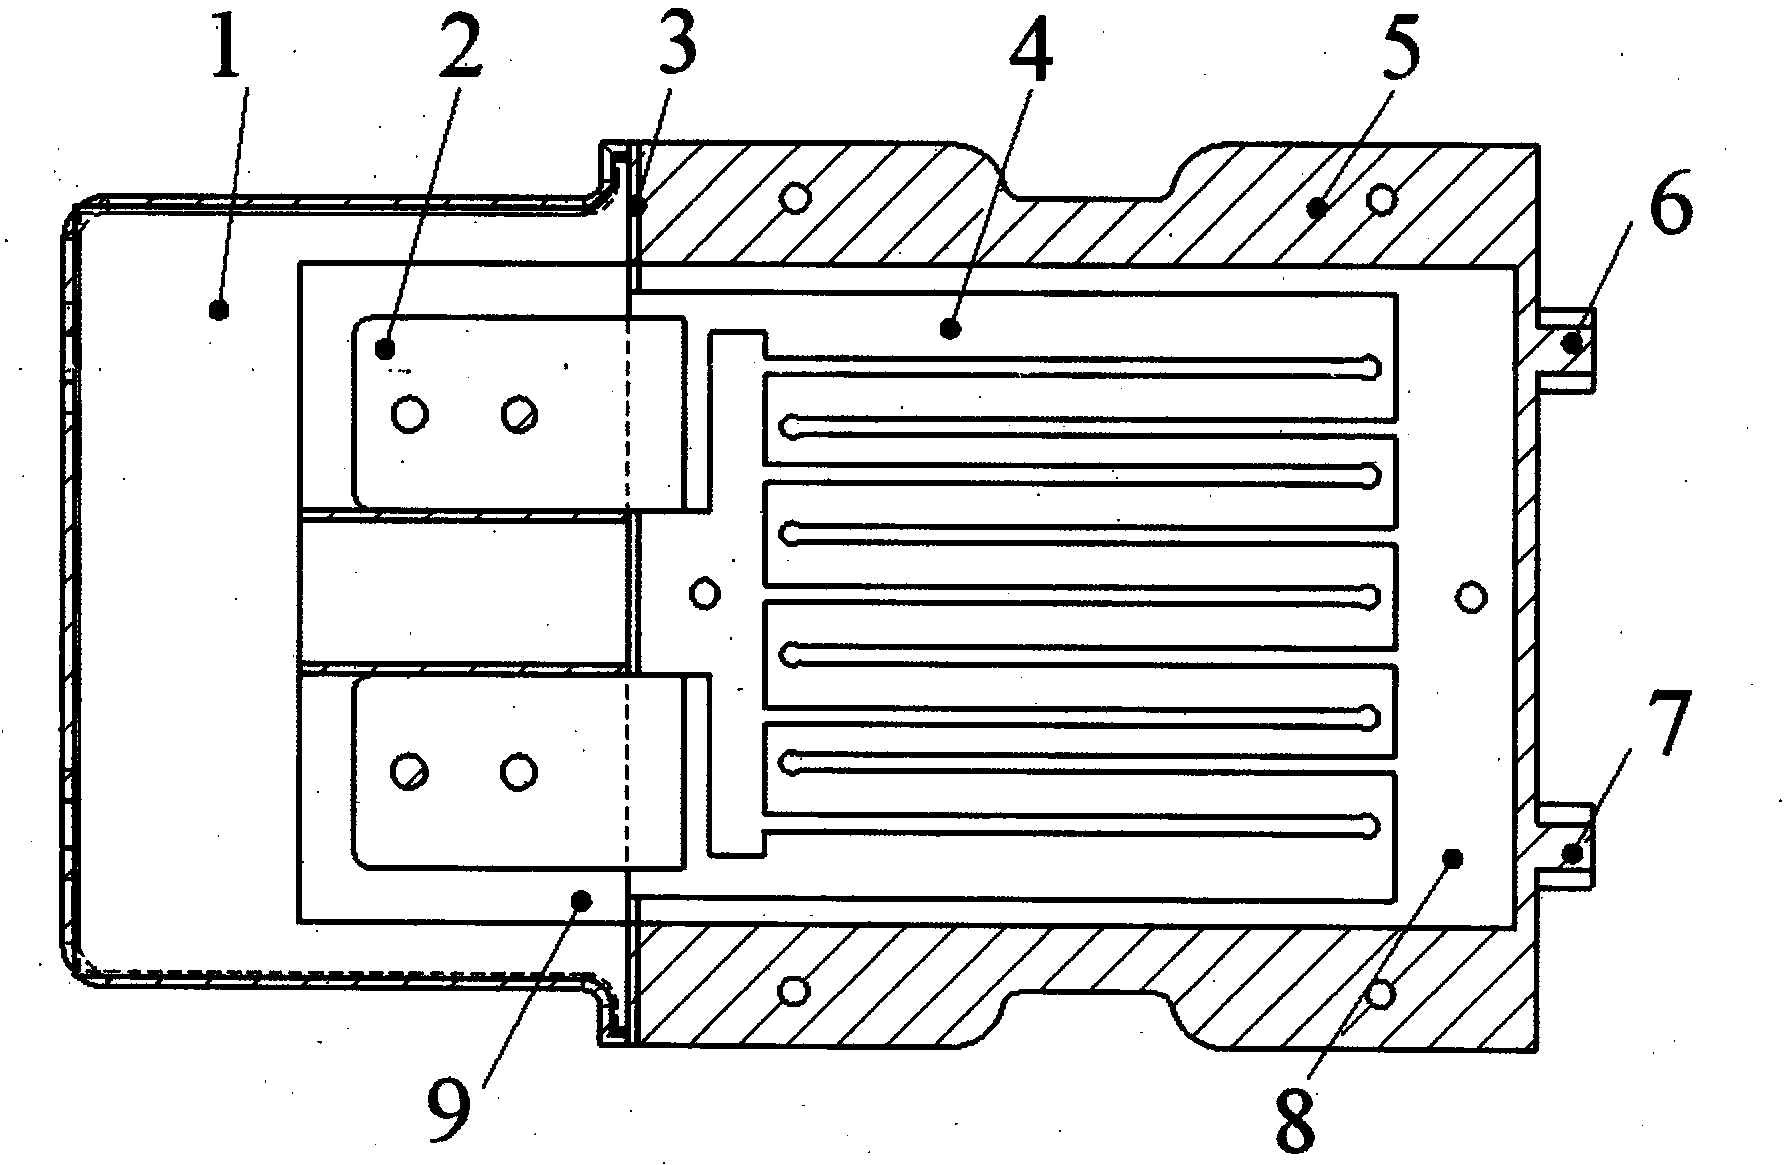 Water-cooling resistor for separation of water and electricity